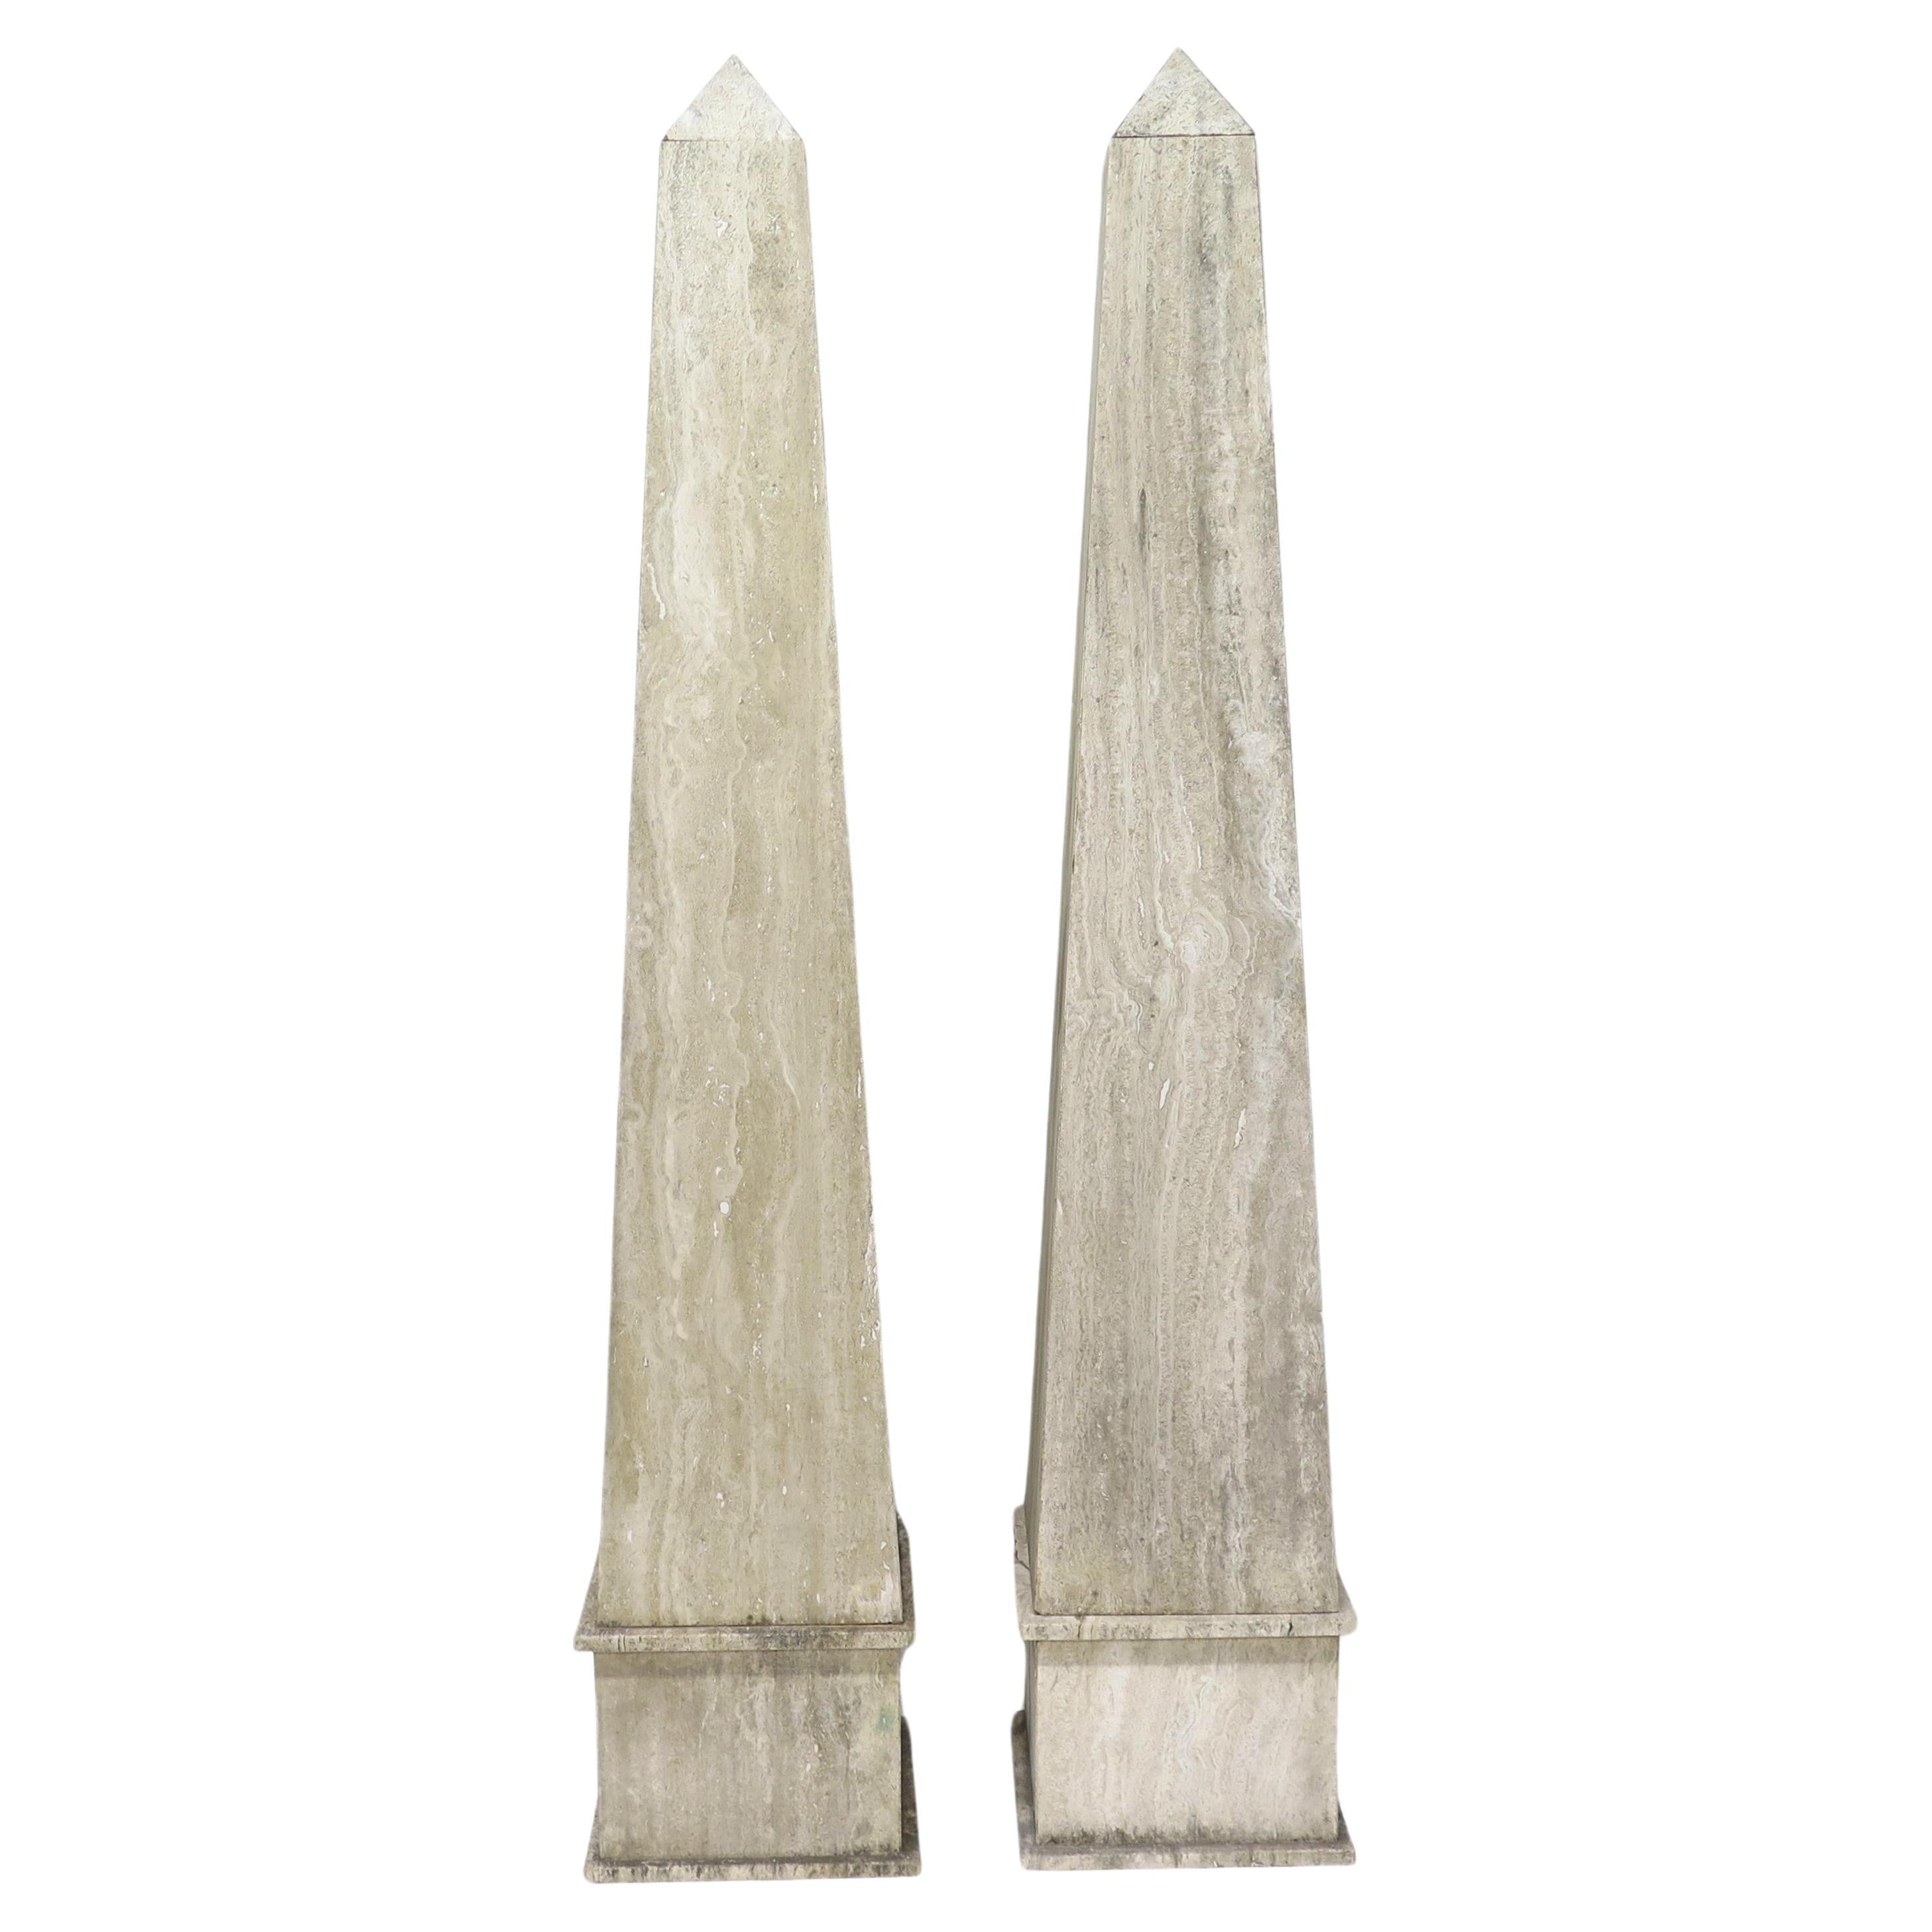 (Over 6' Tall) Large Scale Pair of Italian Travertine Obelisks 